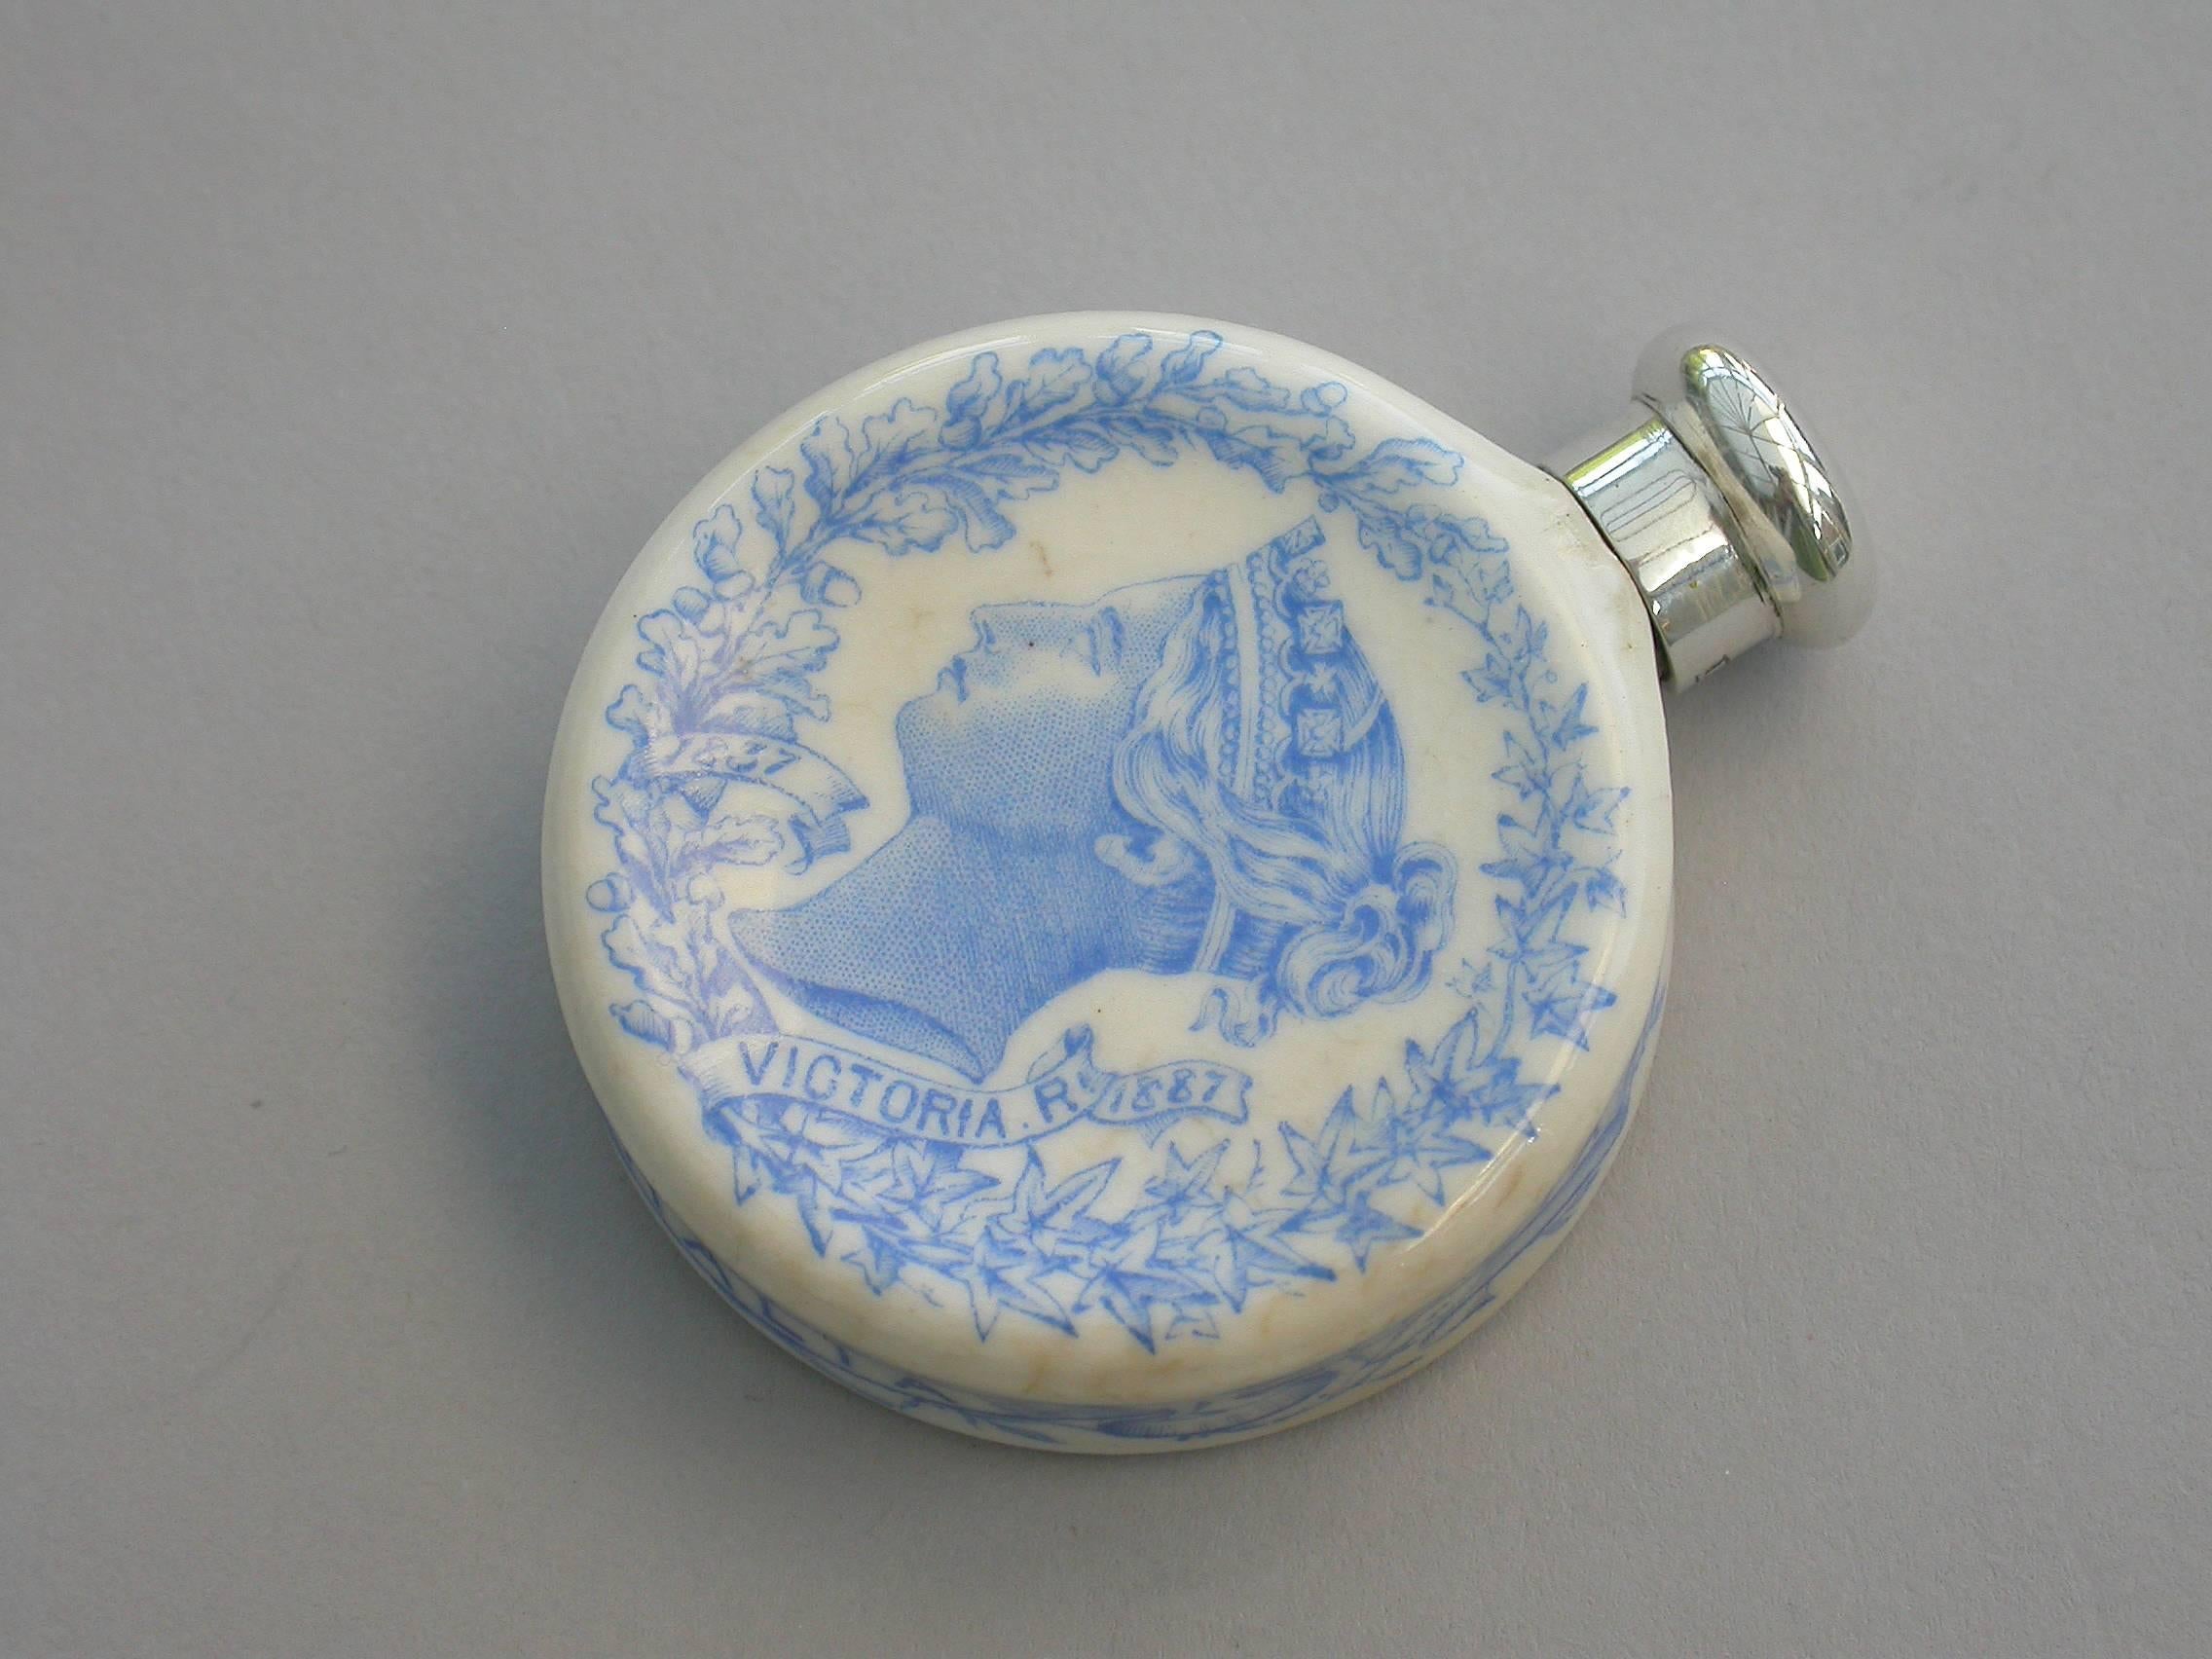 A rare Victorian silver mounted Royal Worcester porcelain scent bottle, made to celebrate Queen Victoria's golden jubilee in 1887. The blue and white transfer printed porcelain bottle features Victoria's portrait to the front and the English Rose,